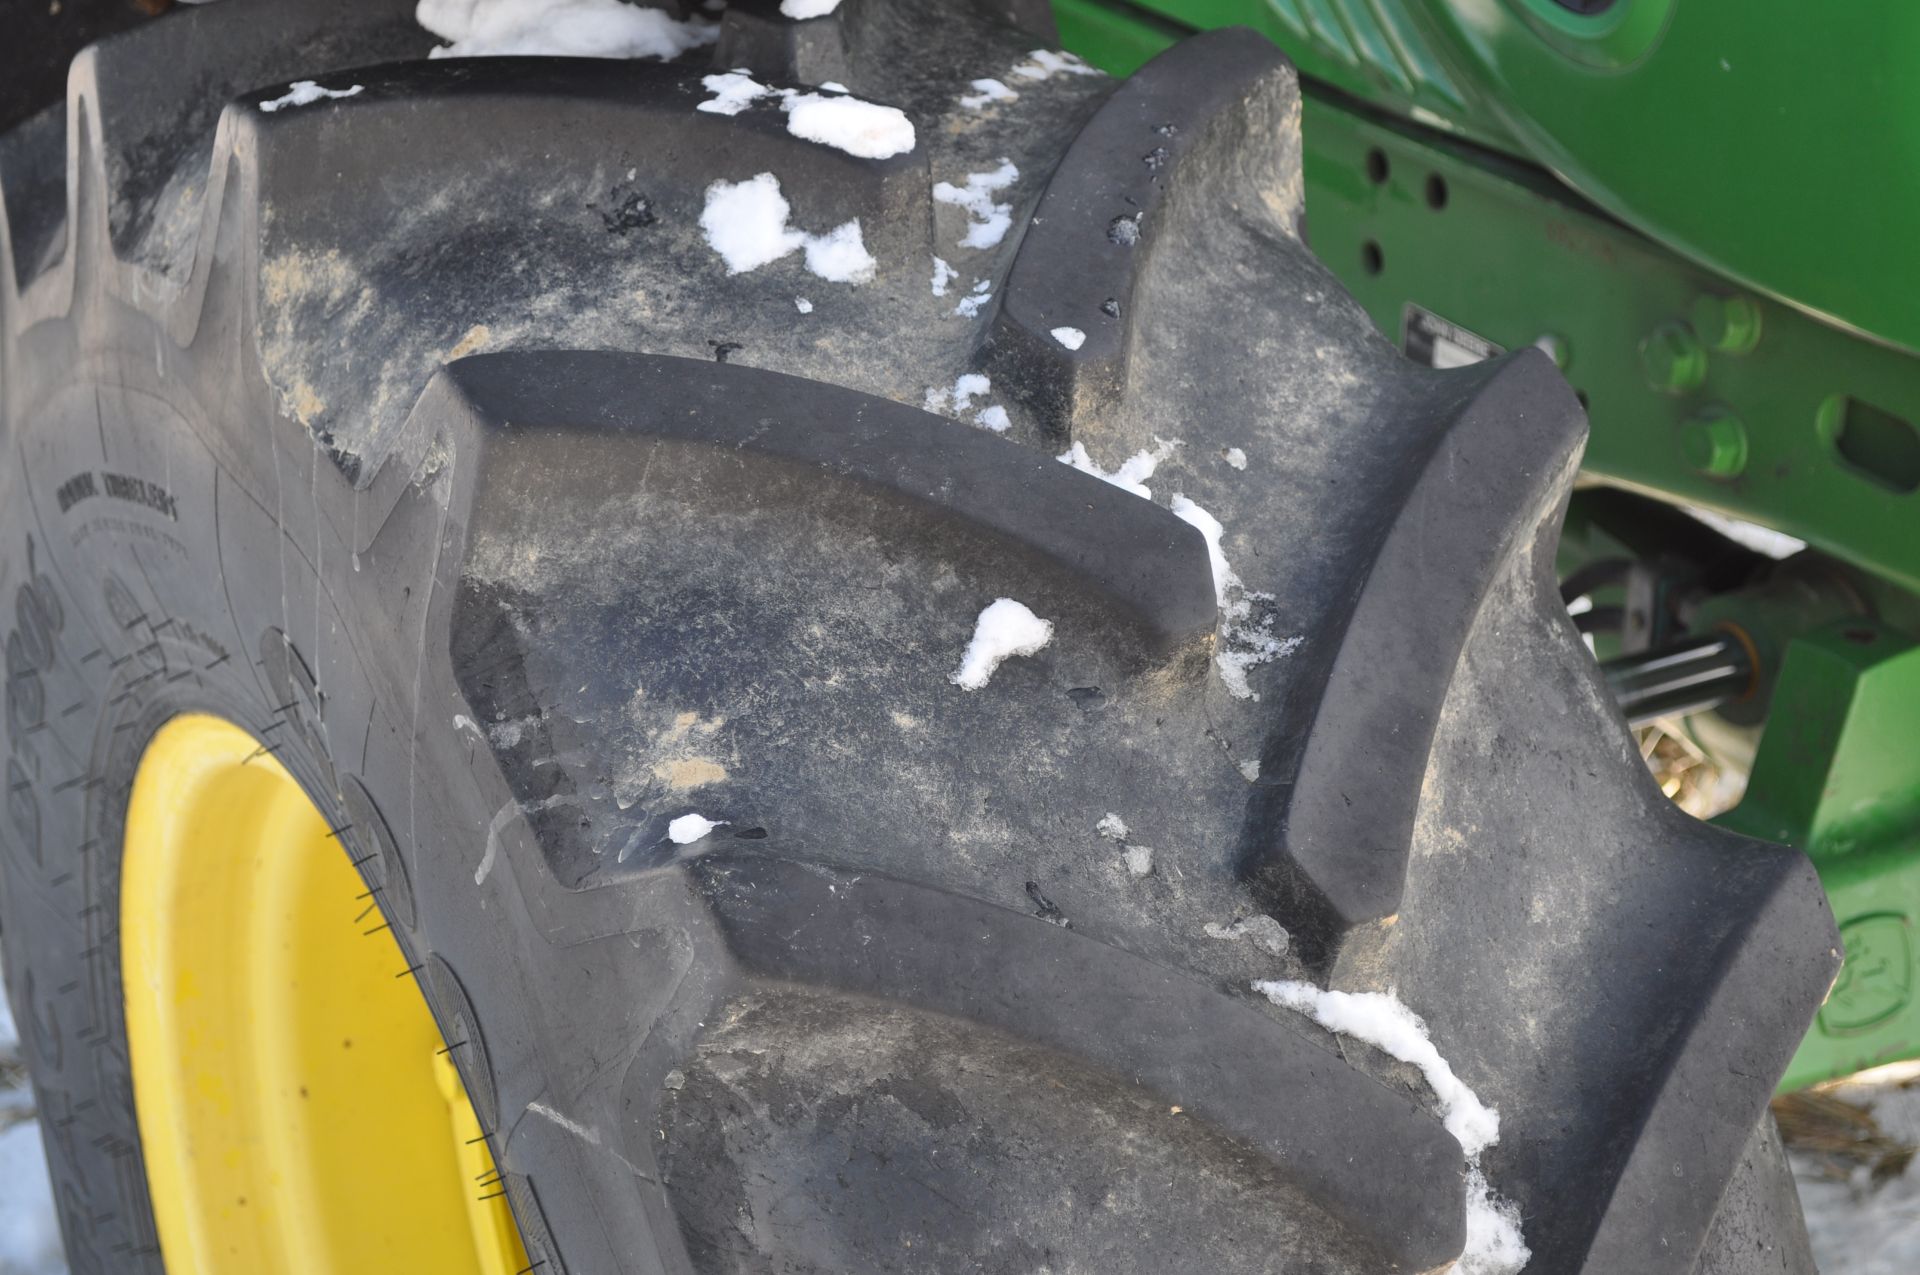 John Deere 6430 tractor, MFWD, C/H/A, 6x4 trans, 460/85R38 rear, 420/85R24 front, front fenders, - Image 11 of 36